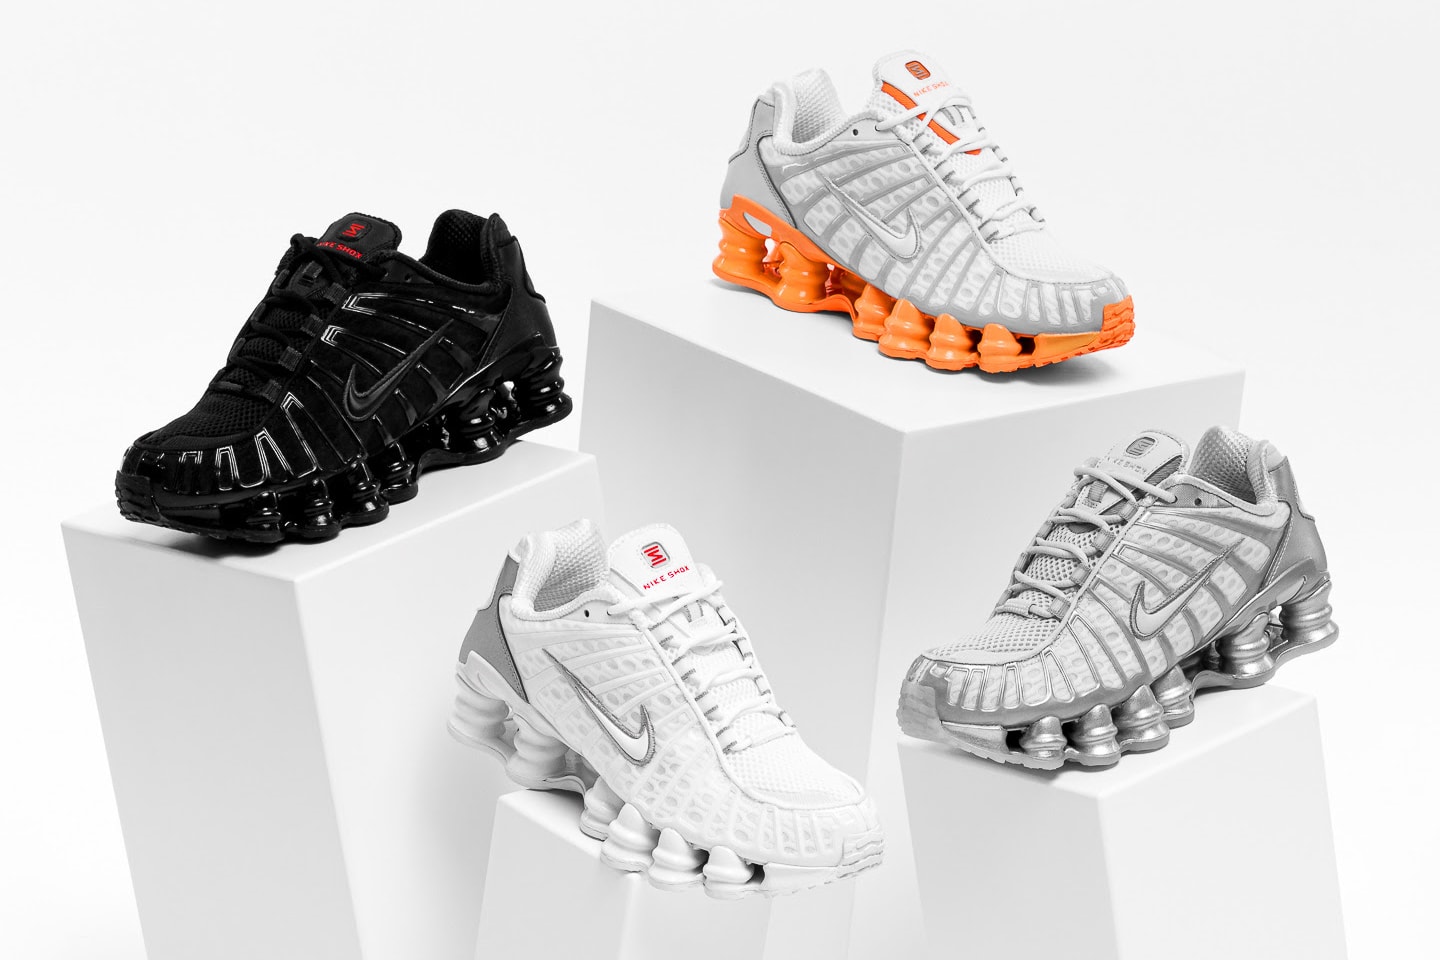 The Nike Shox TL is Released in 4 New Colorways